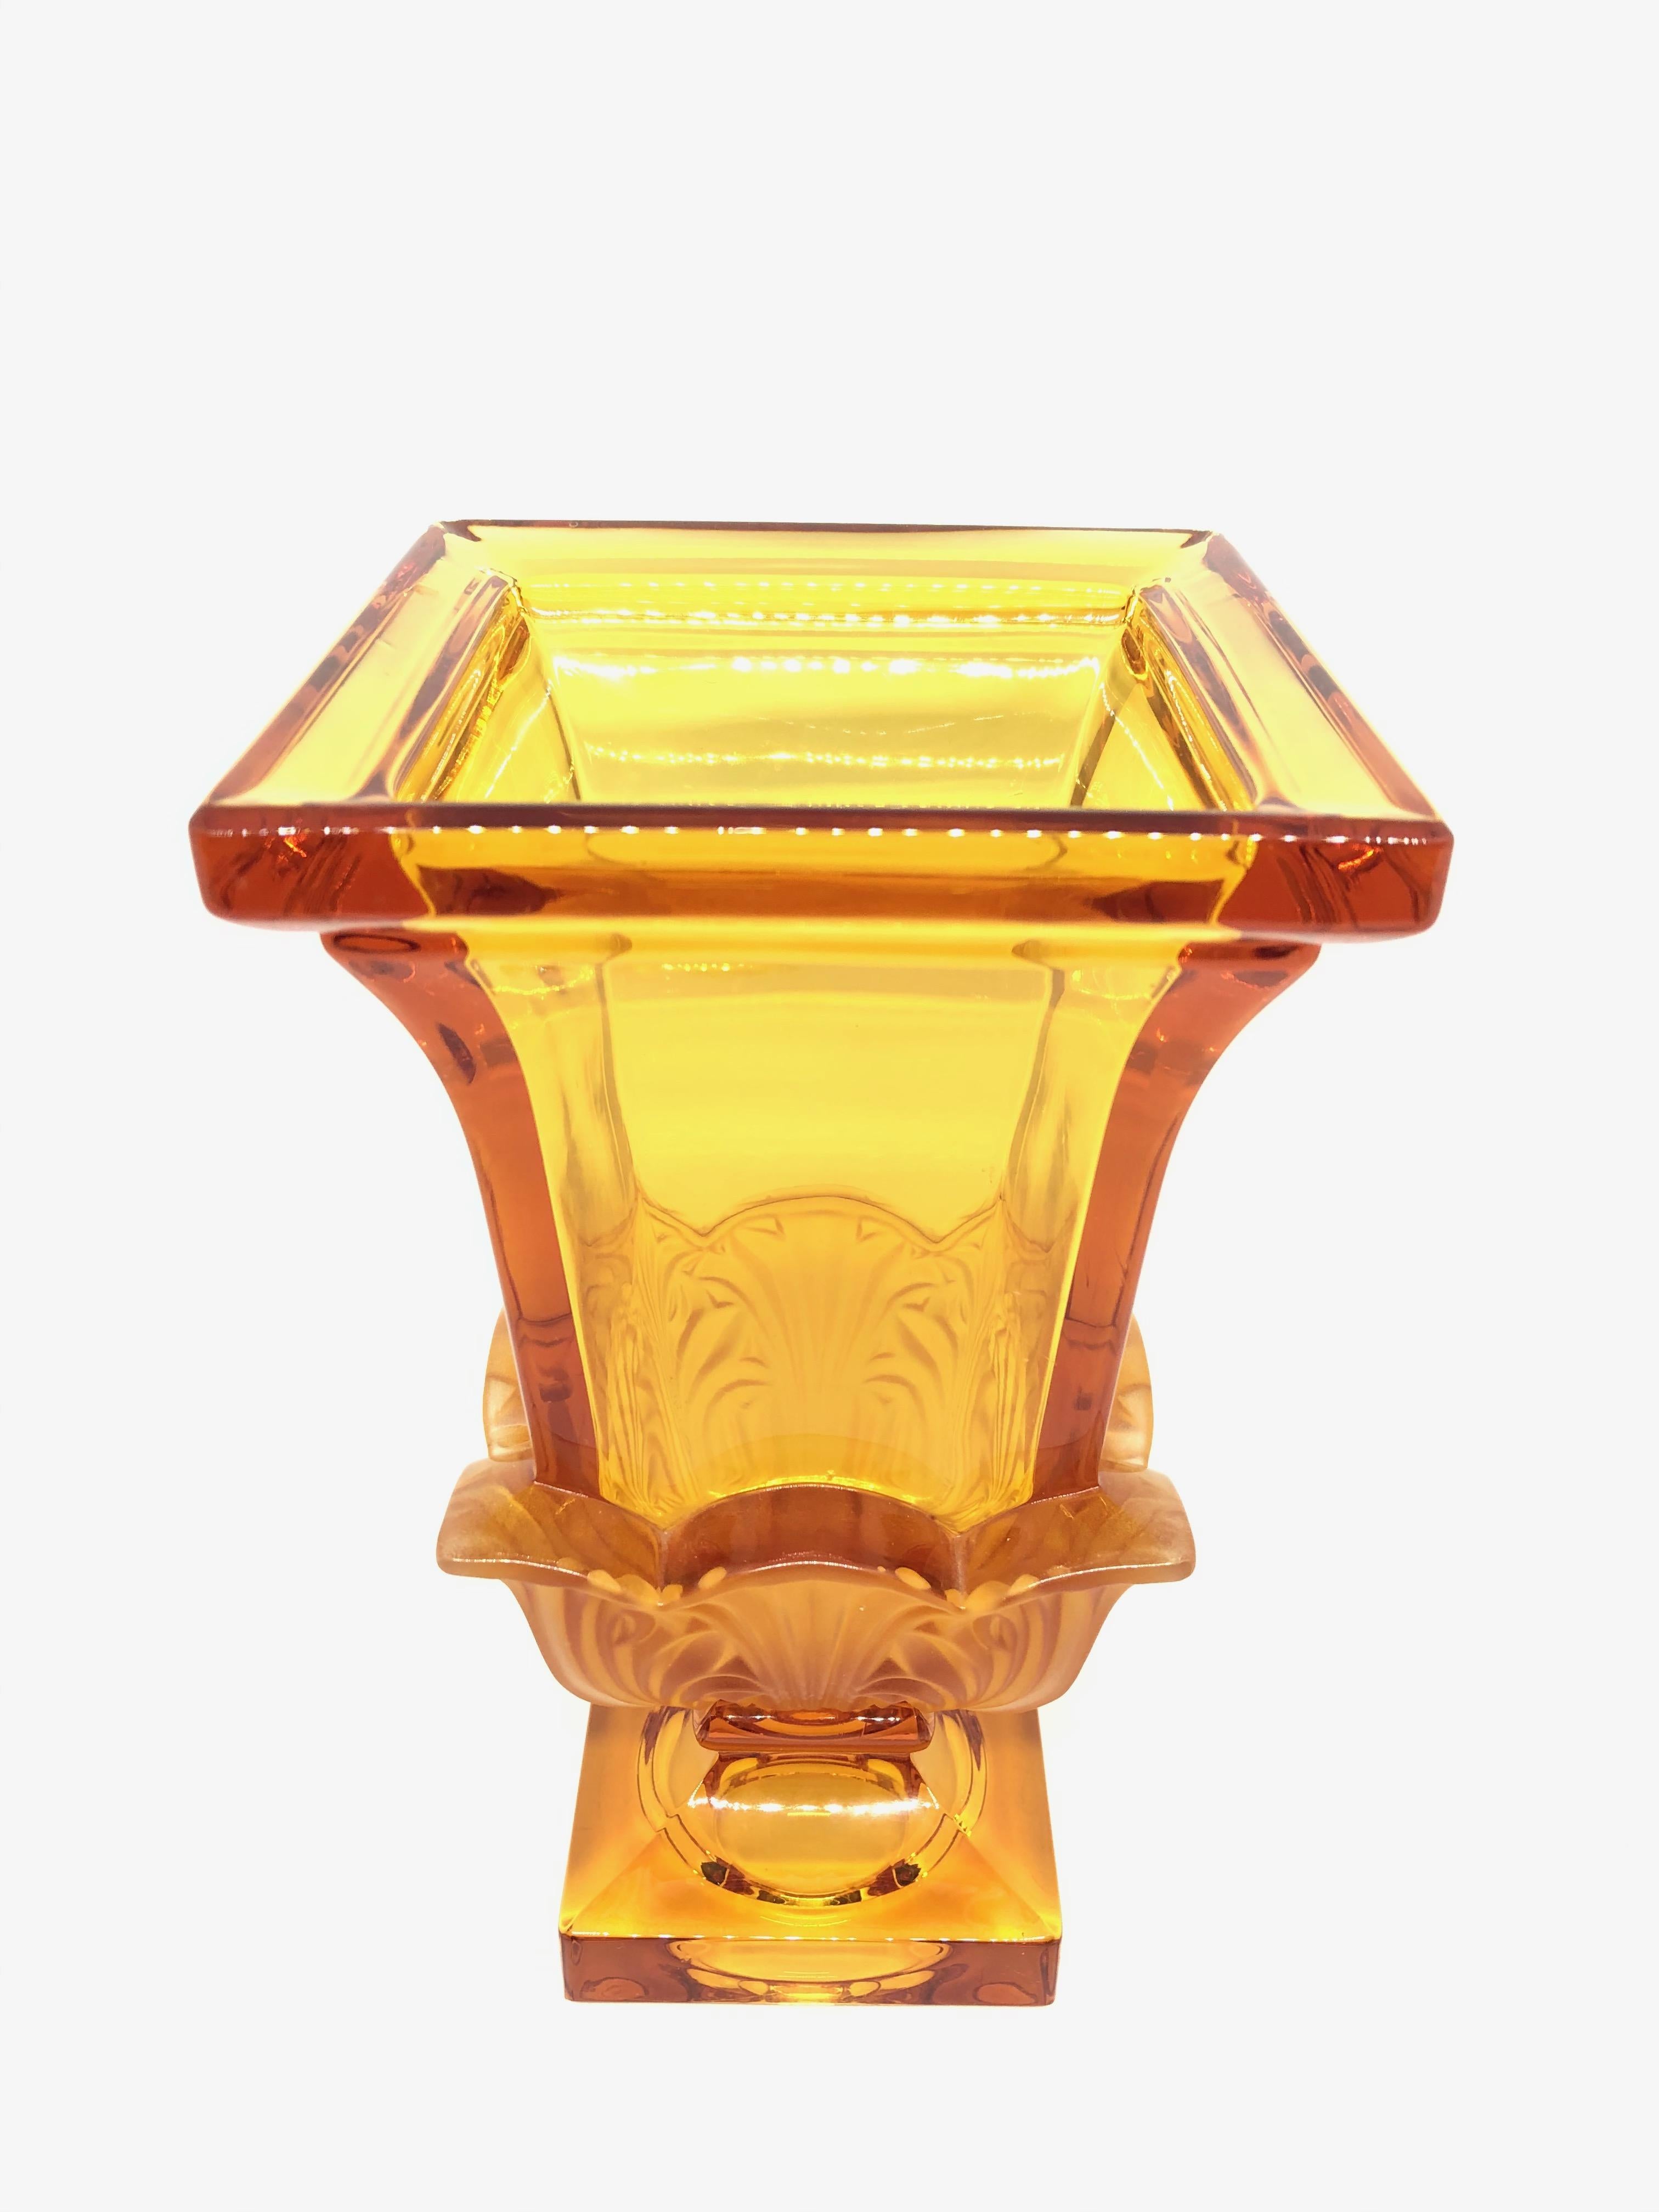 Czech Josephinenhuette Moser Style Amber colored Glass footed Vase Catchall, 1920s